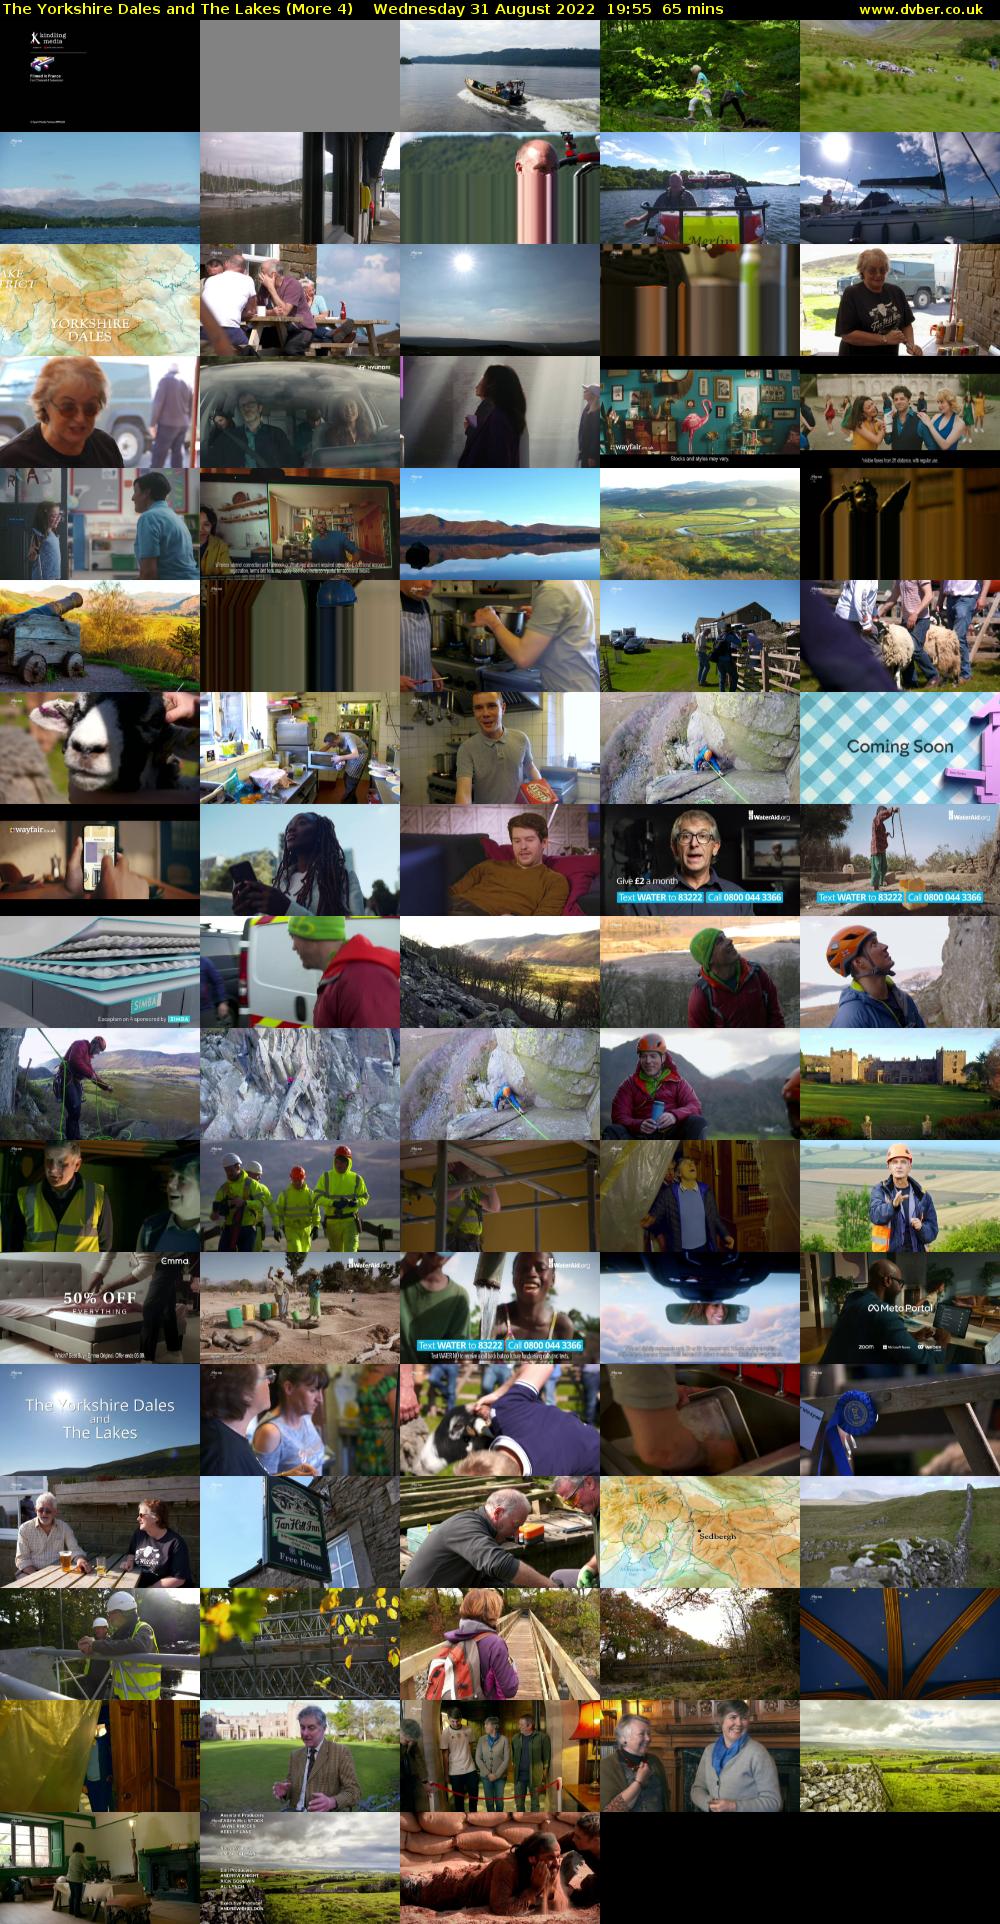 The Yorkshire Dales and The Lakes (More 4) Wednesday 31 August 2022 19:55 - 21:00